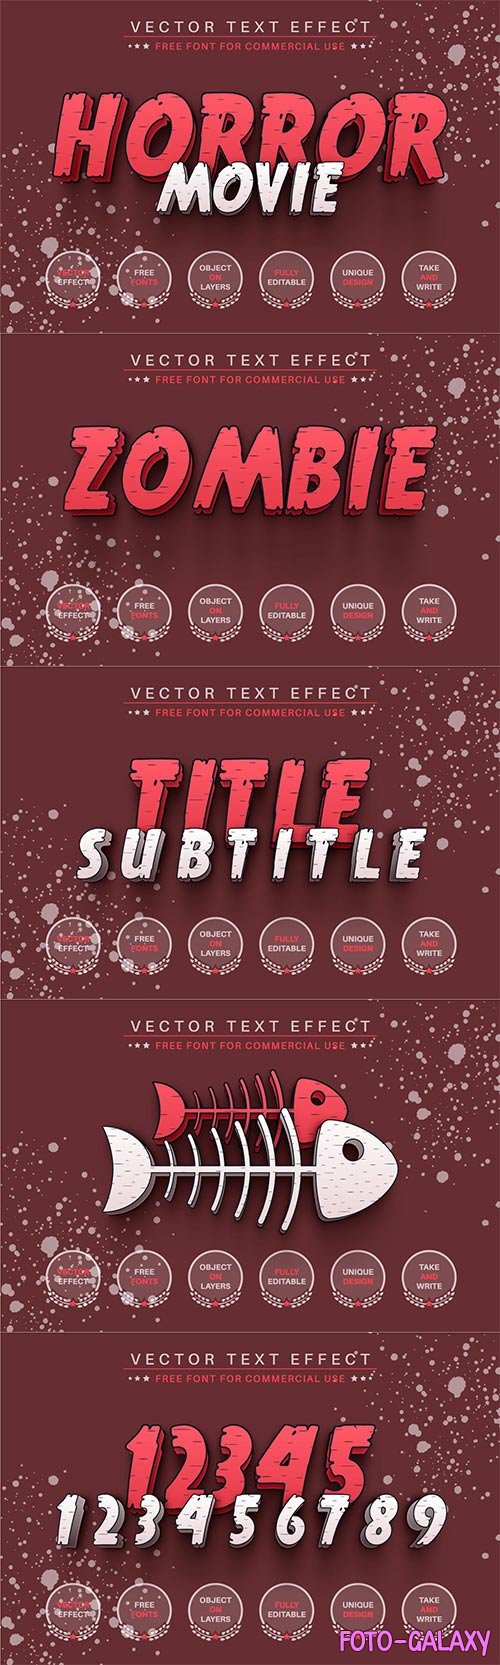 Horror Movie - Editable Text Effect, Font Style